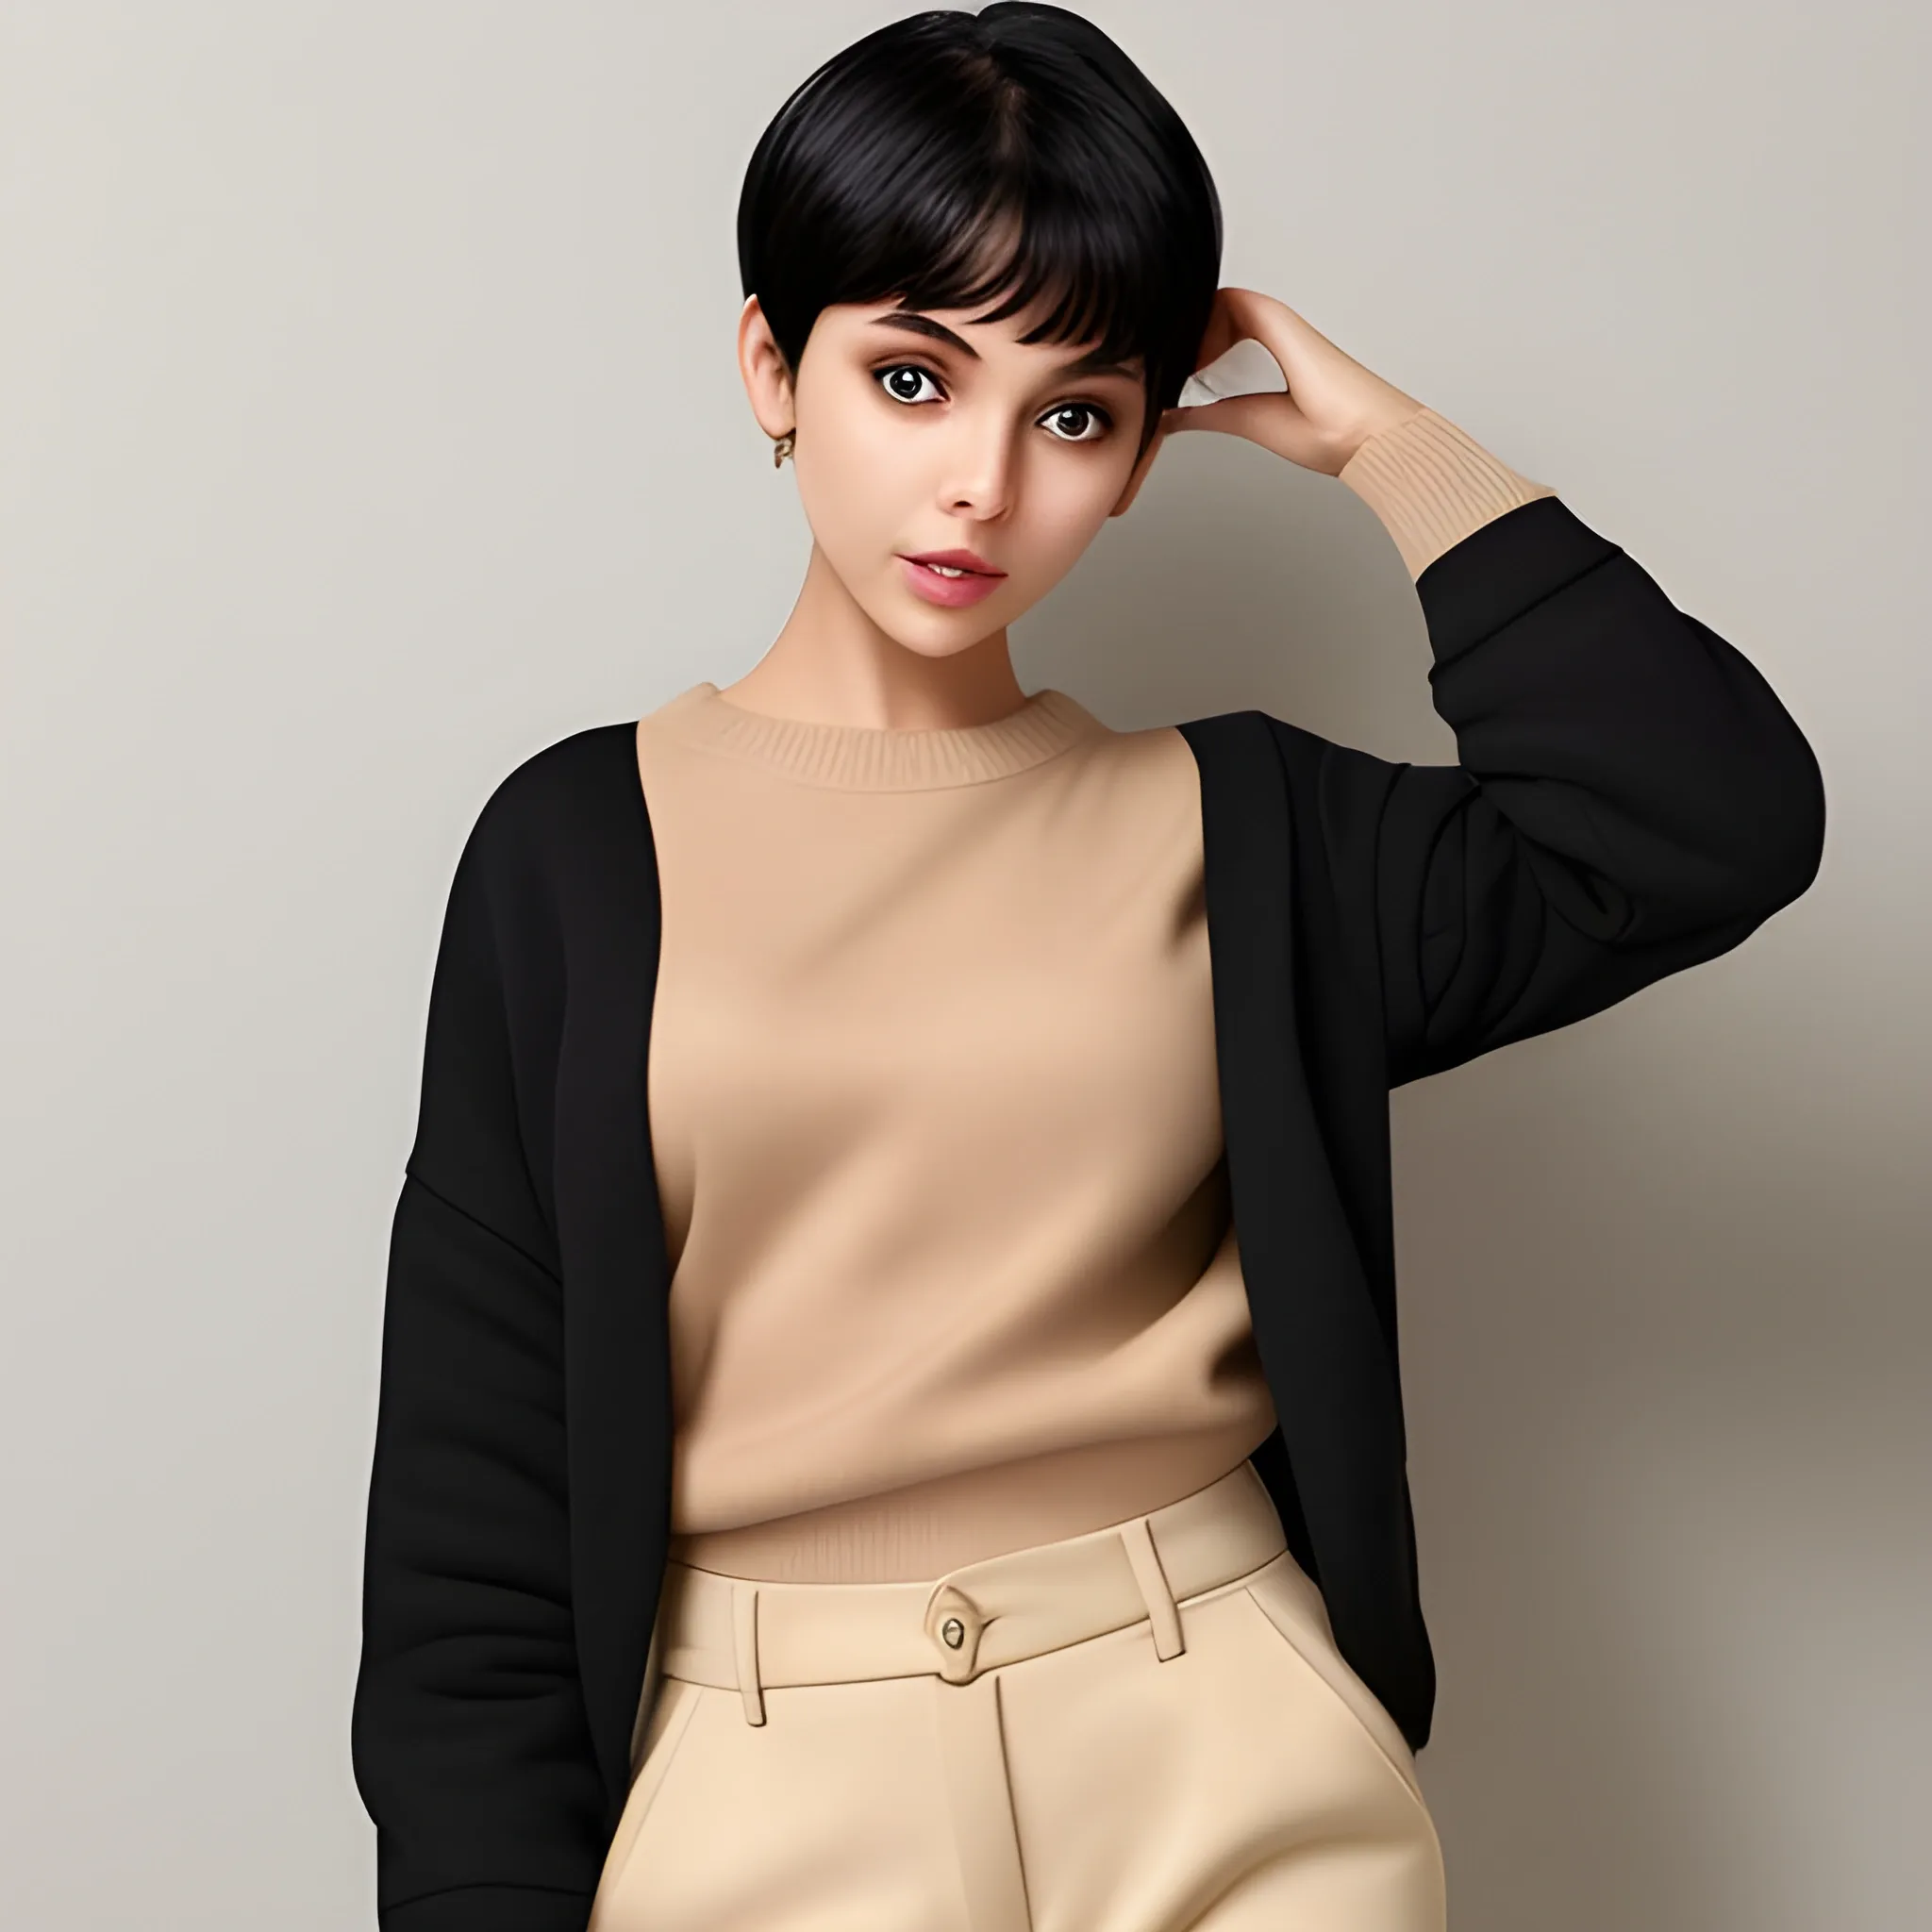 shy goddes with beige sweater and black short hair complete body shining 